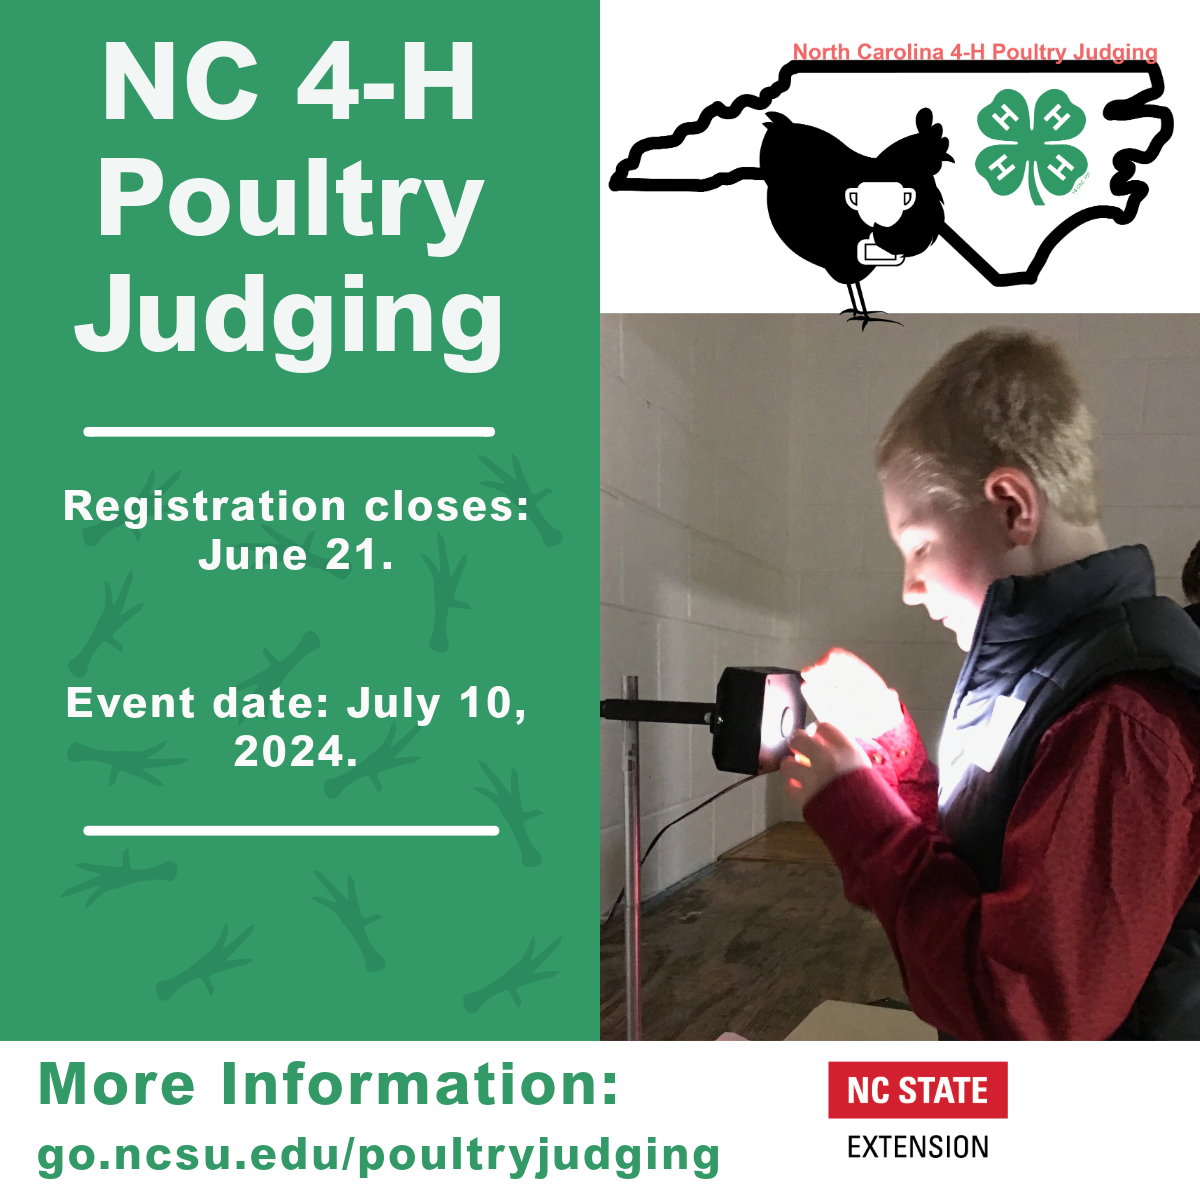 NC 4-H Poultry Judging. Hosted by NC State Extension and NC 4-H